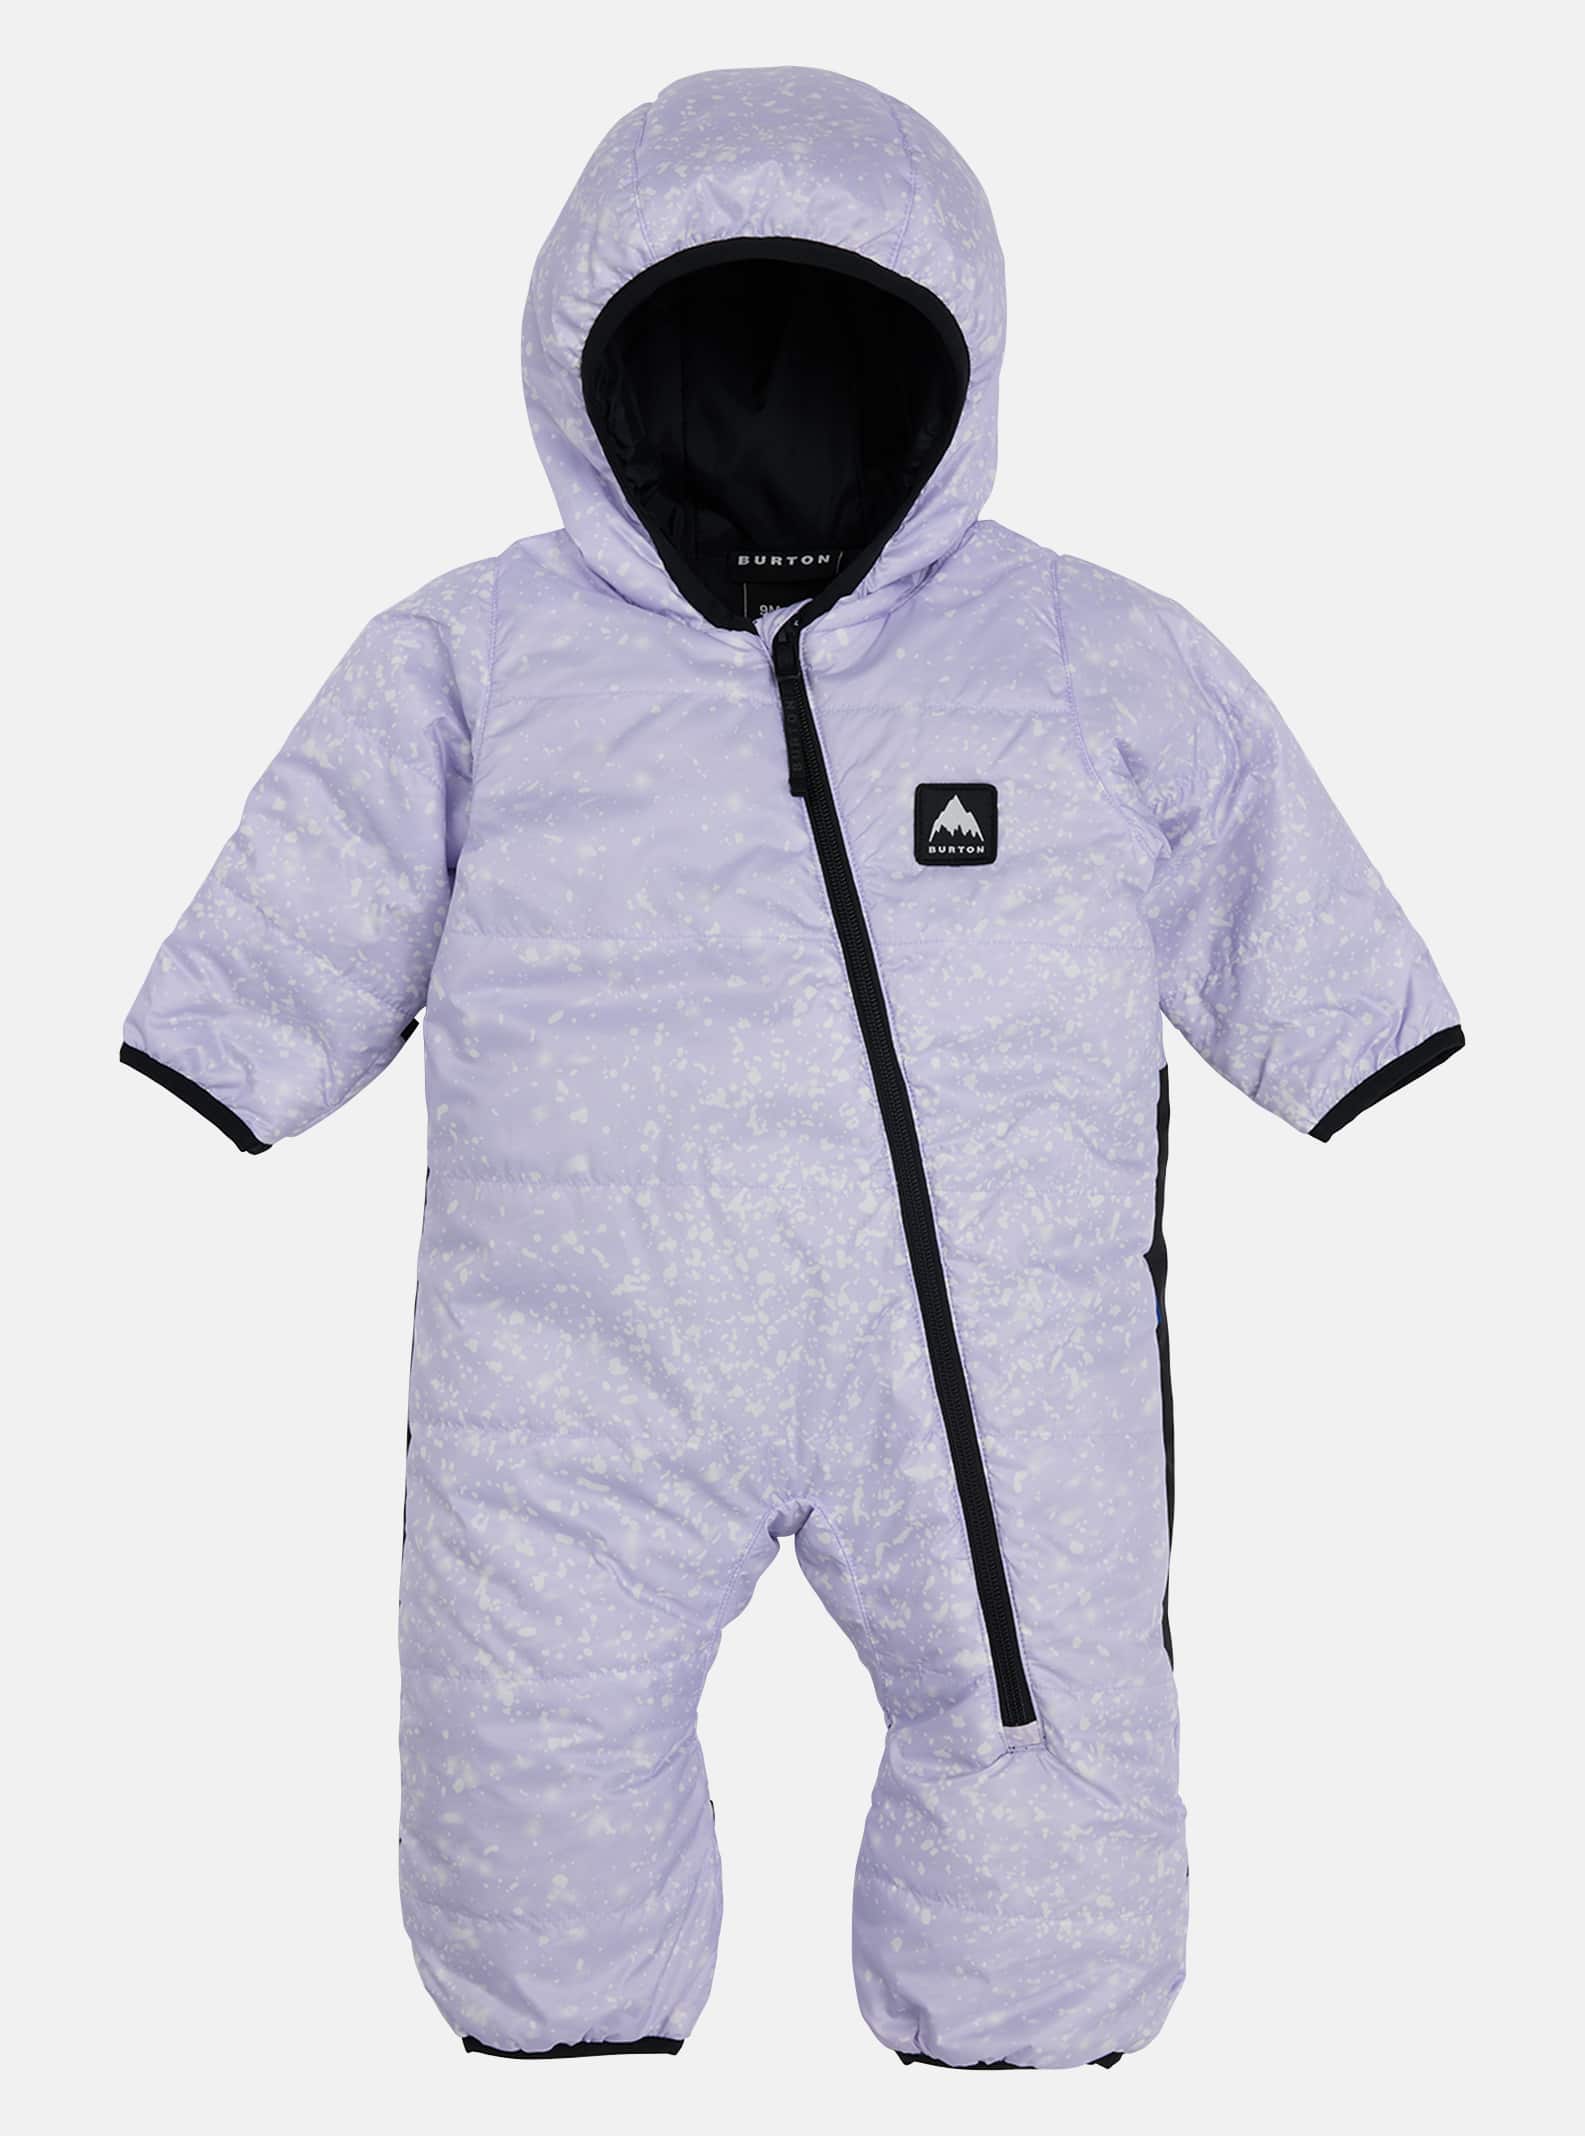 Infants' Buddy Bunting Suit